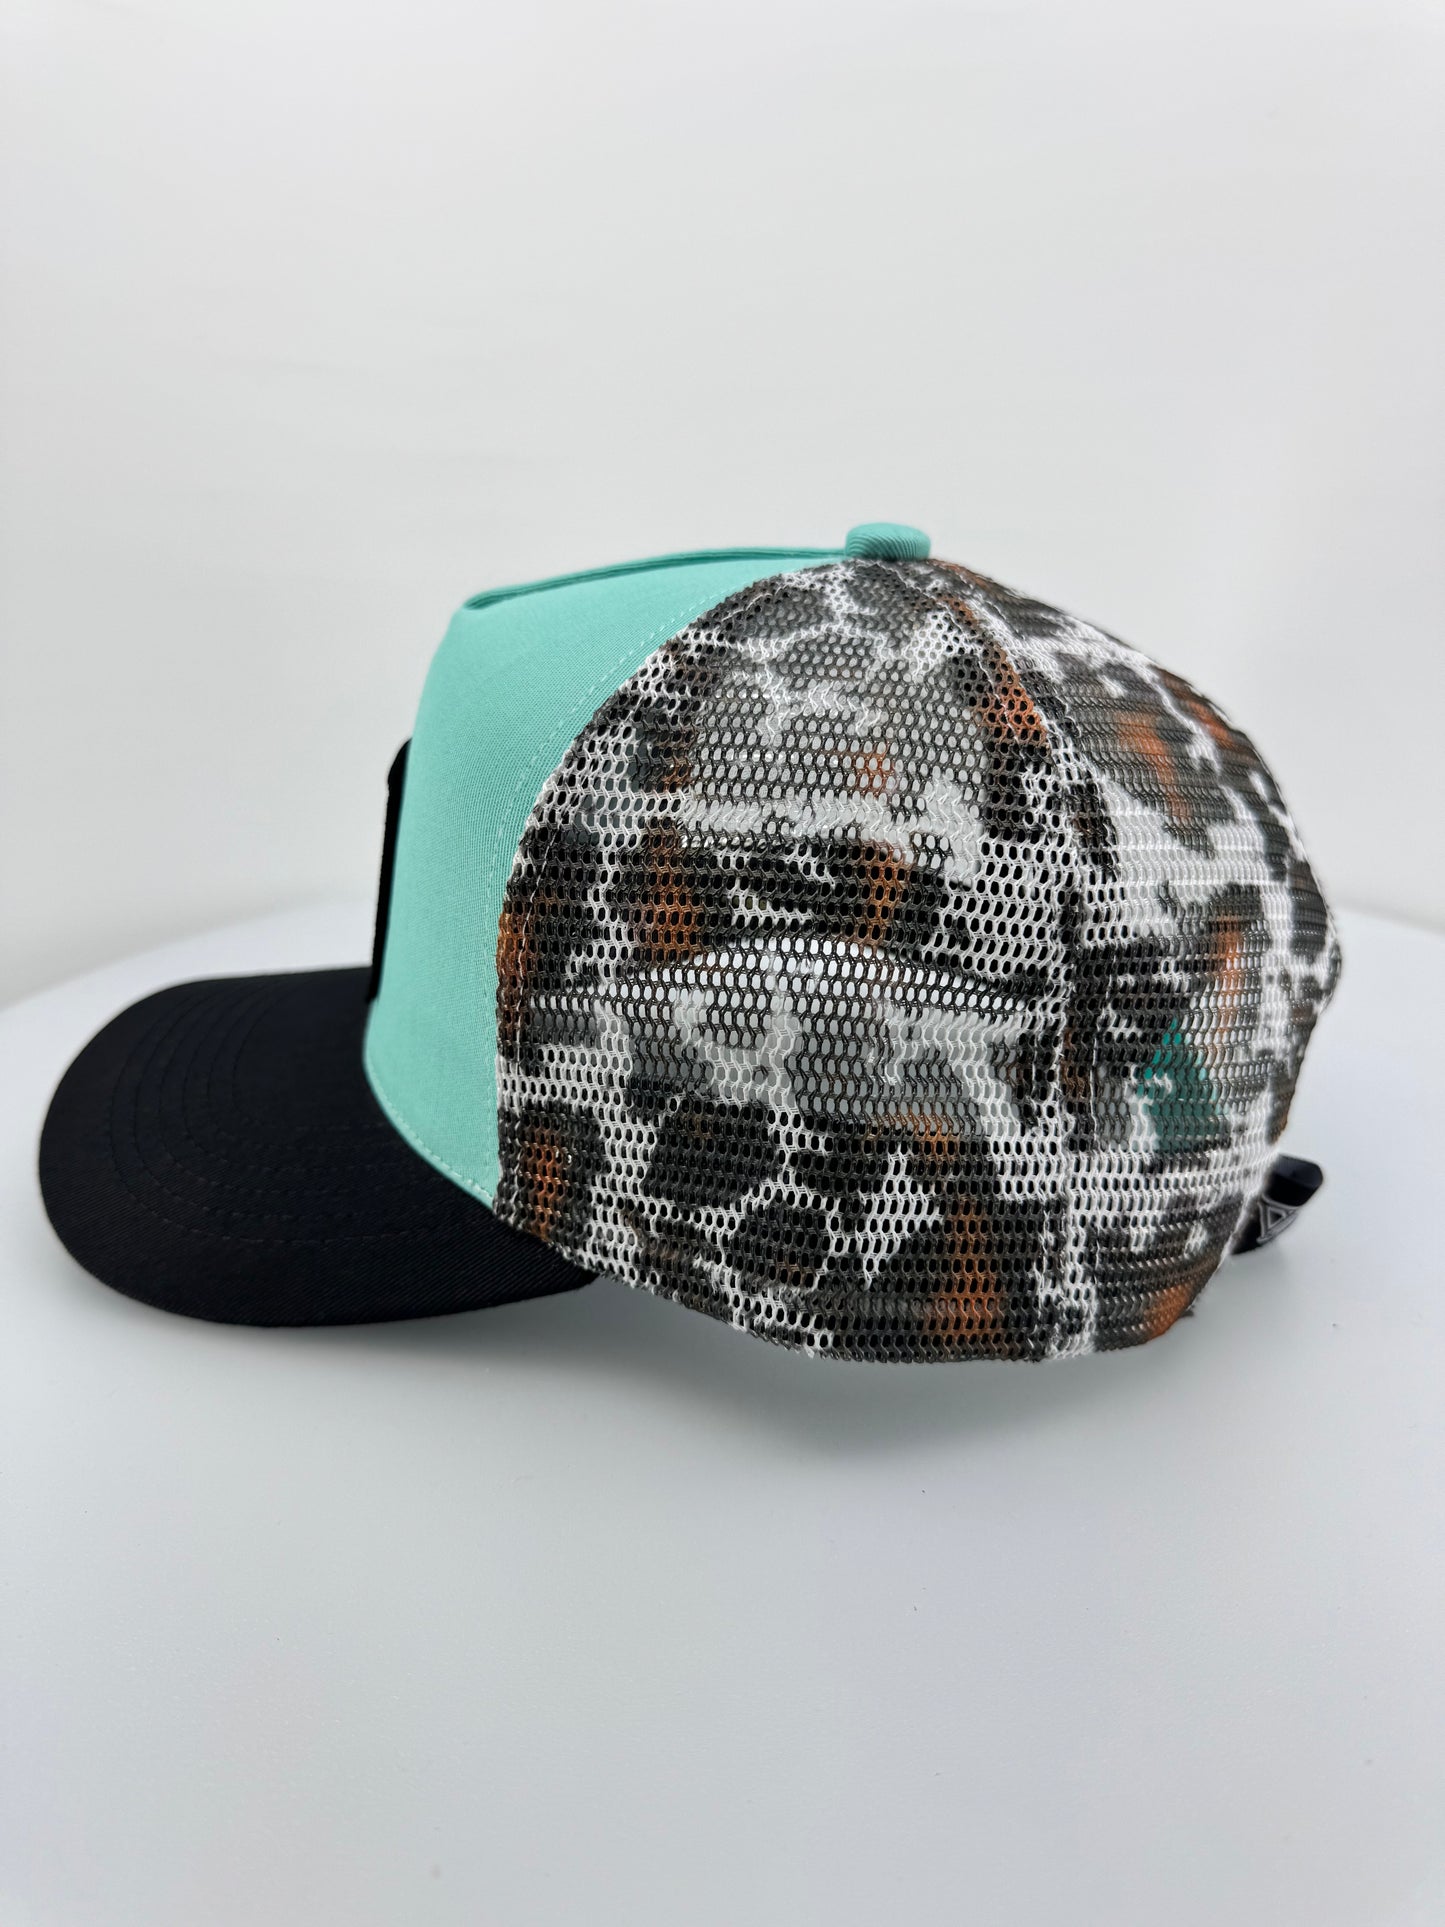 The Johnny Highland Cow Patch and Cow Print Trucker Hat